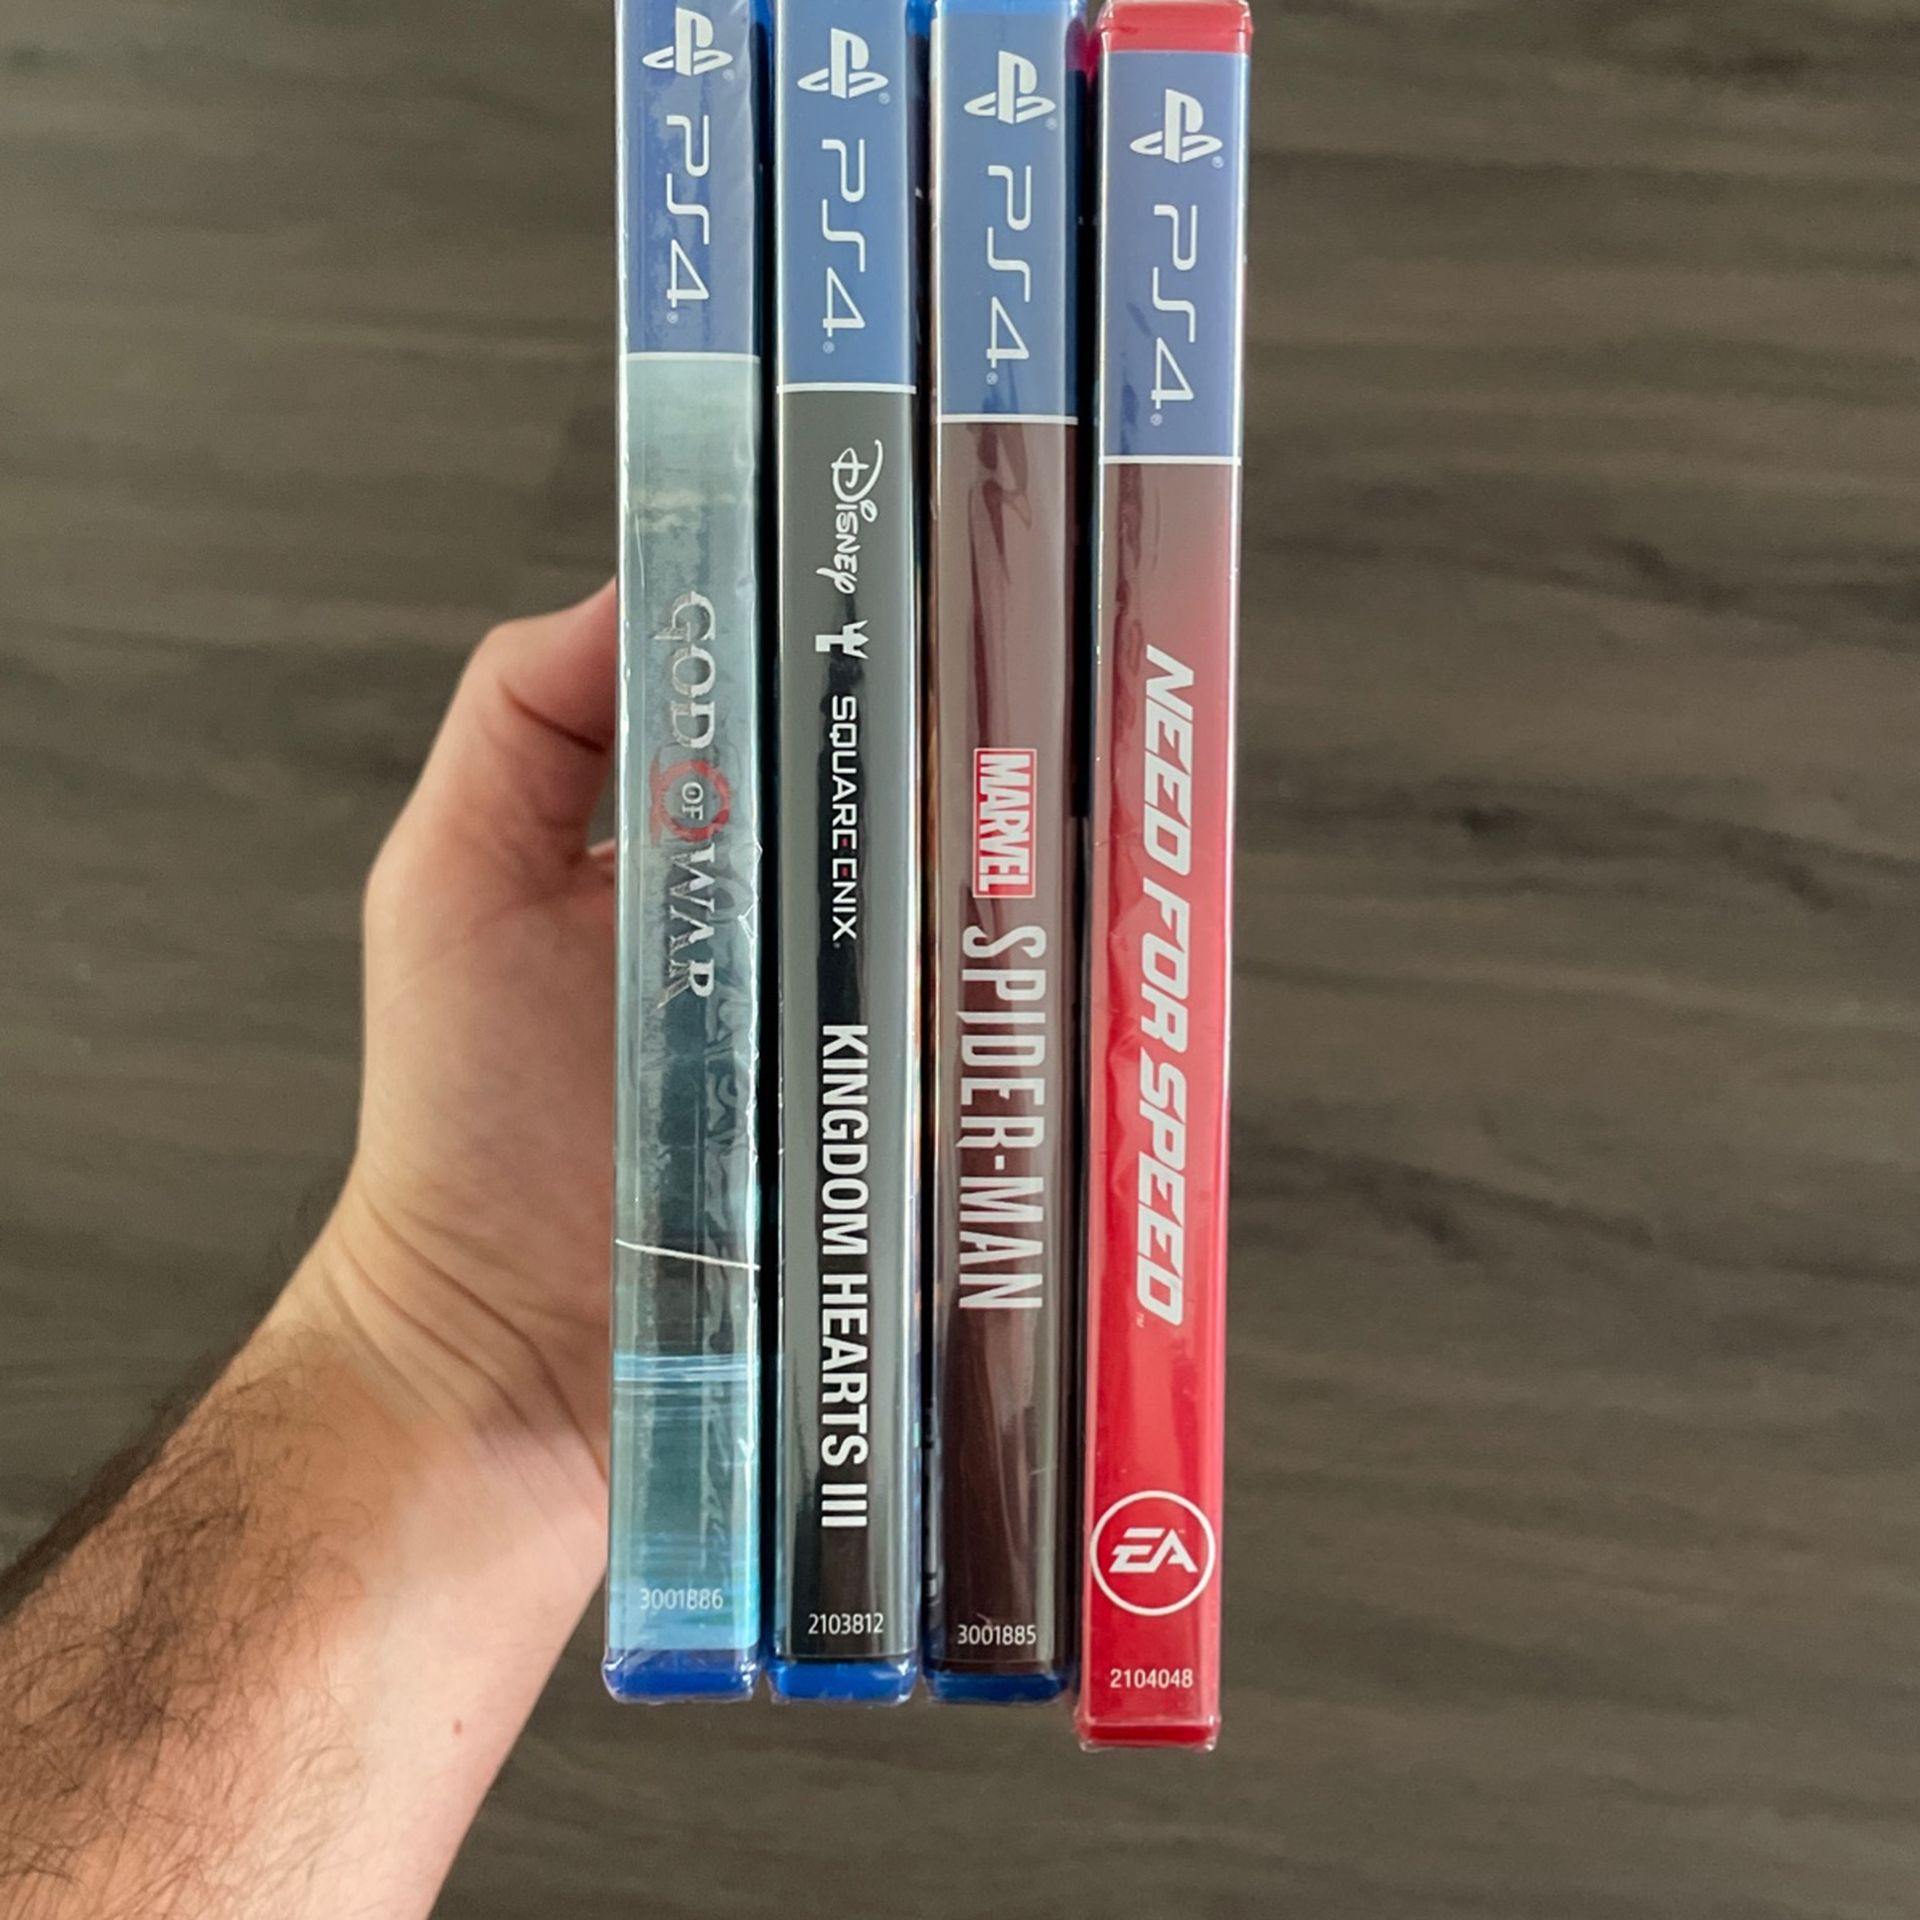 Brand New PS4 Games